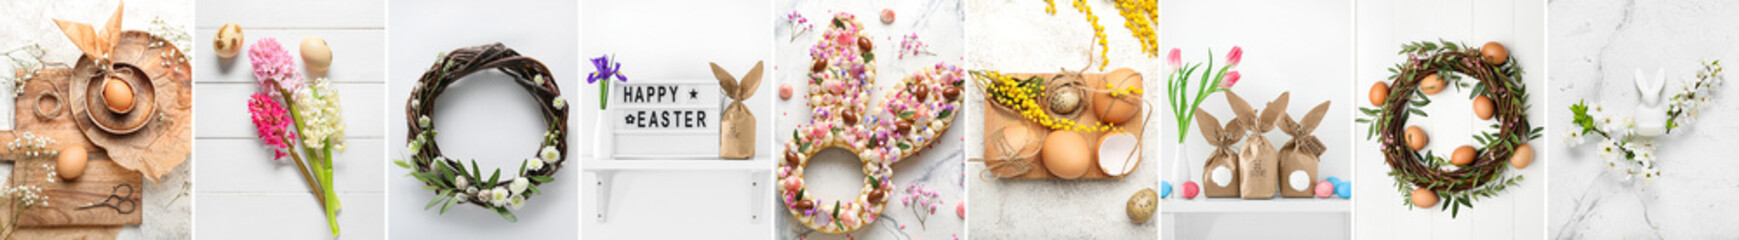 Festive collage for Easter celebration with spring flowers, tasty cake, bunnies and eggs on light...